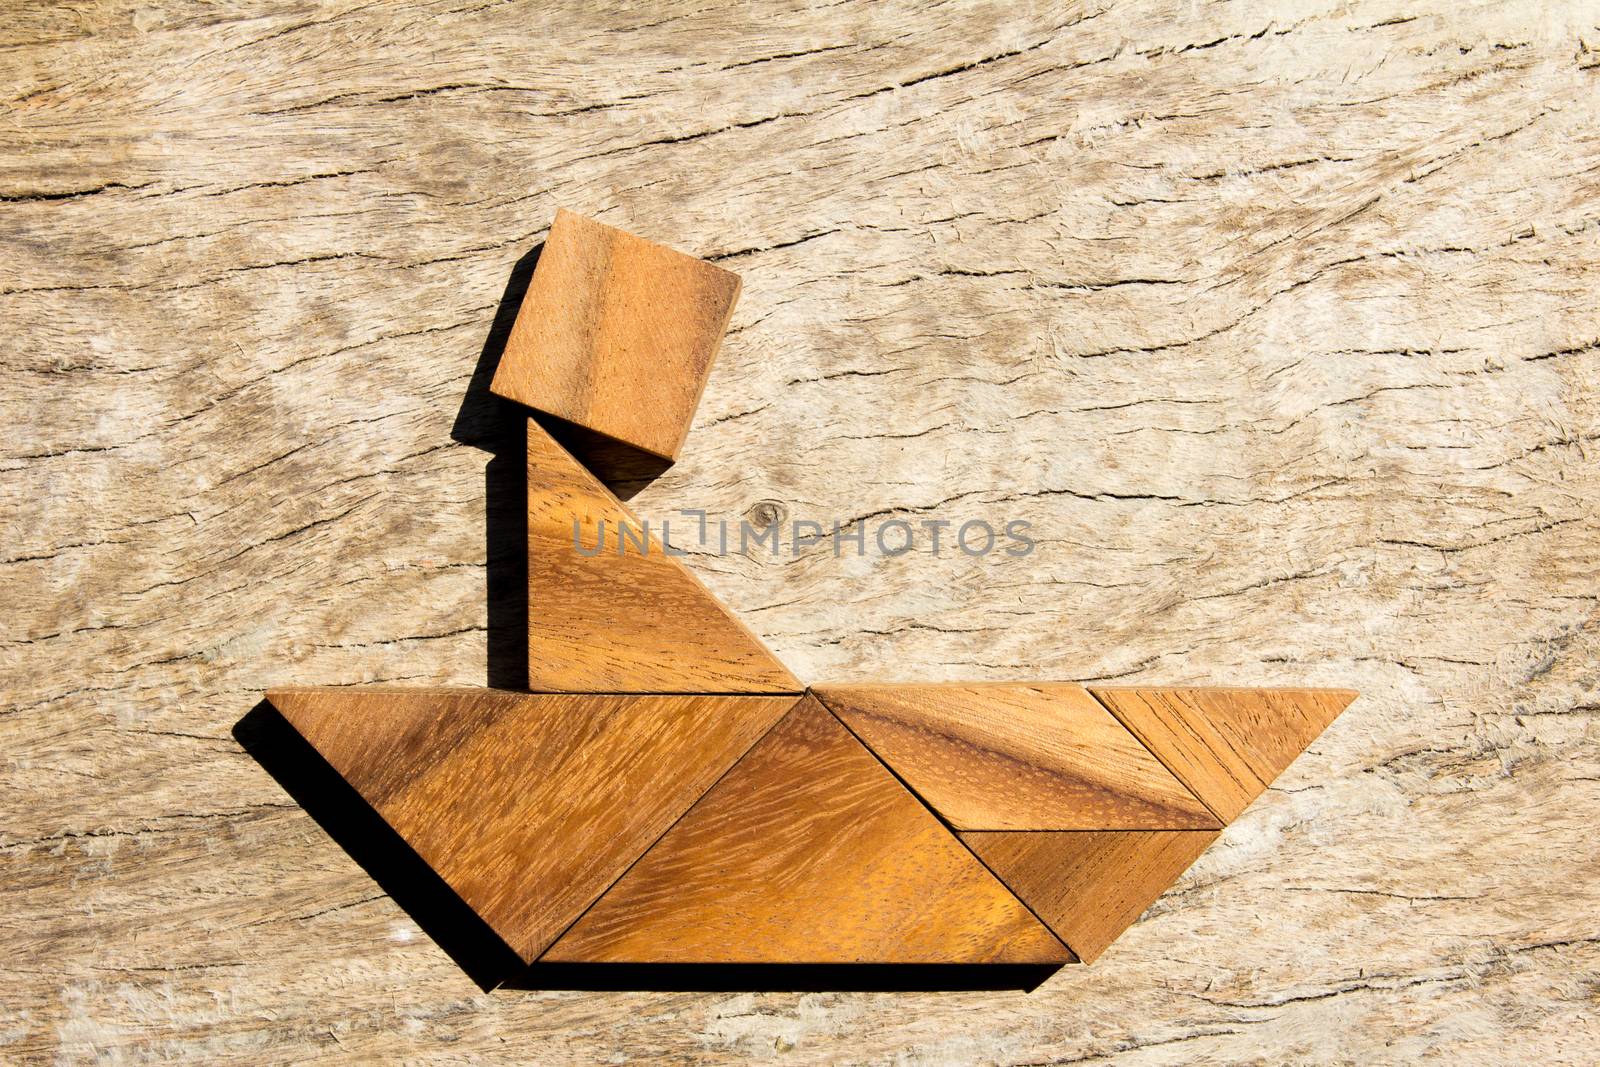 Wooden tangram puzzle as man thinking on boat shape